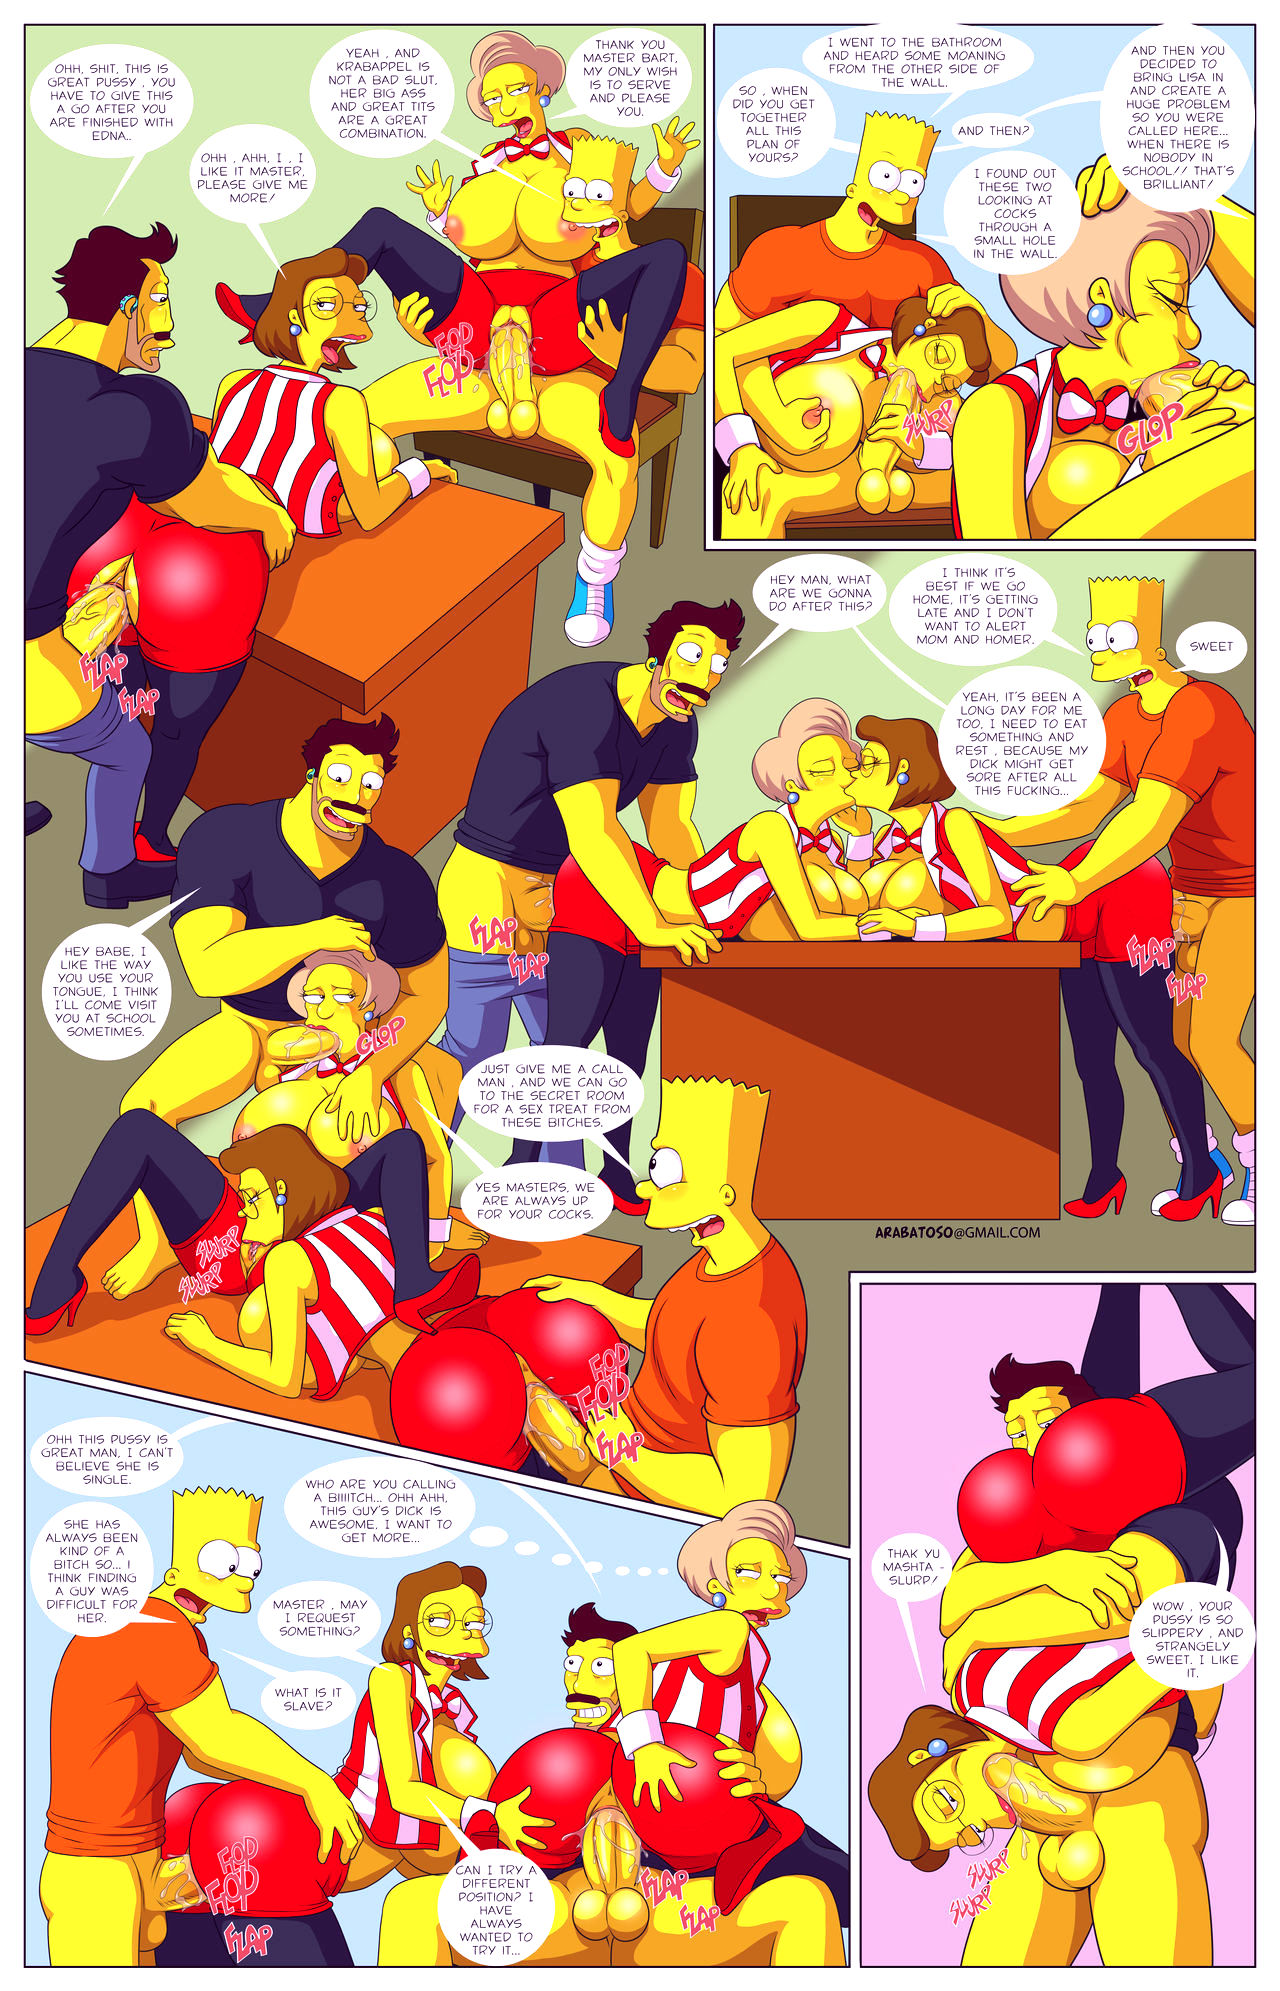 Darrens adventure or welcome to springfield porn comic picture 32